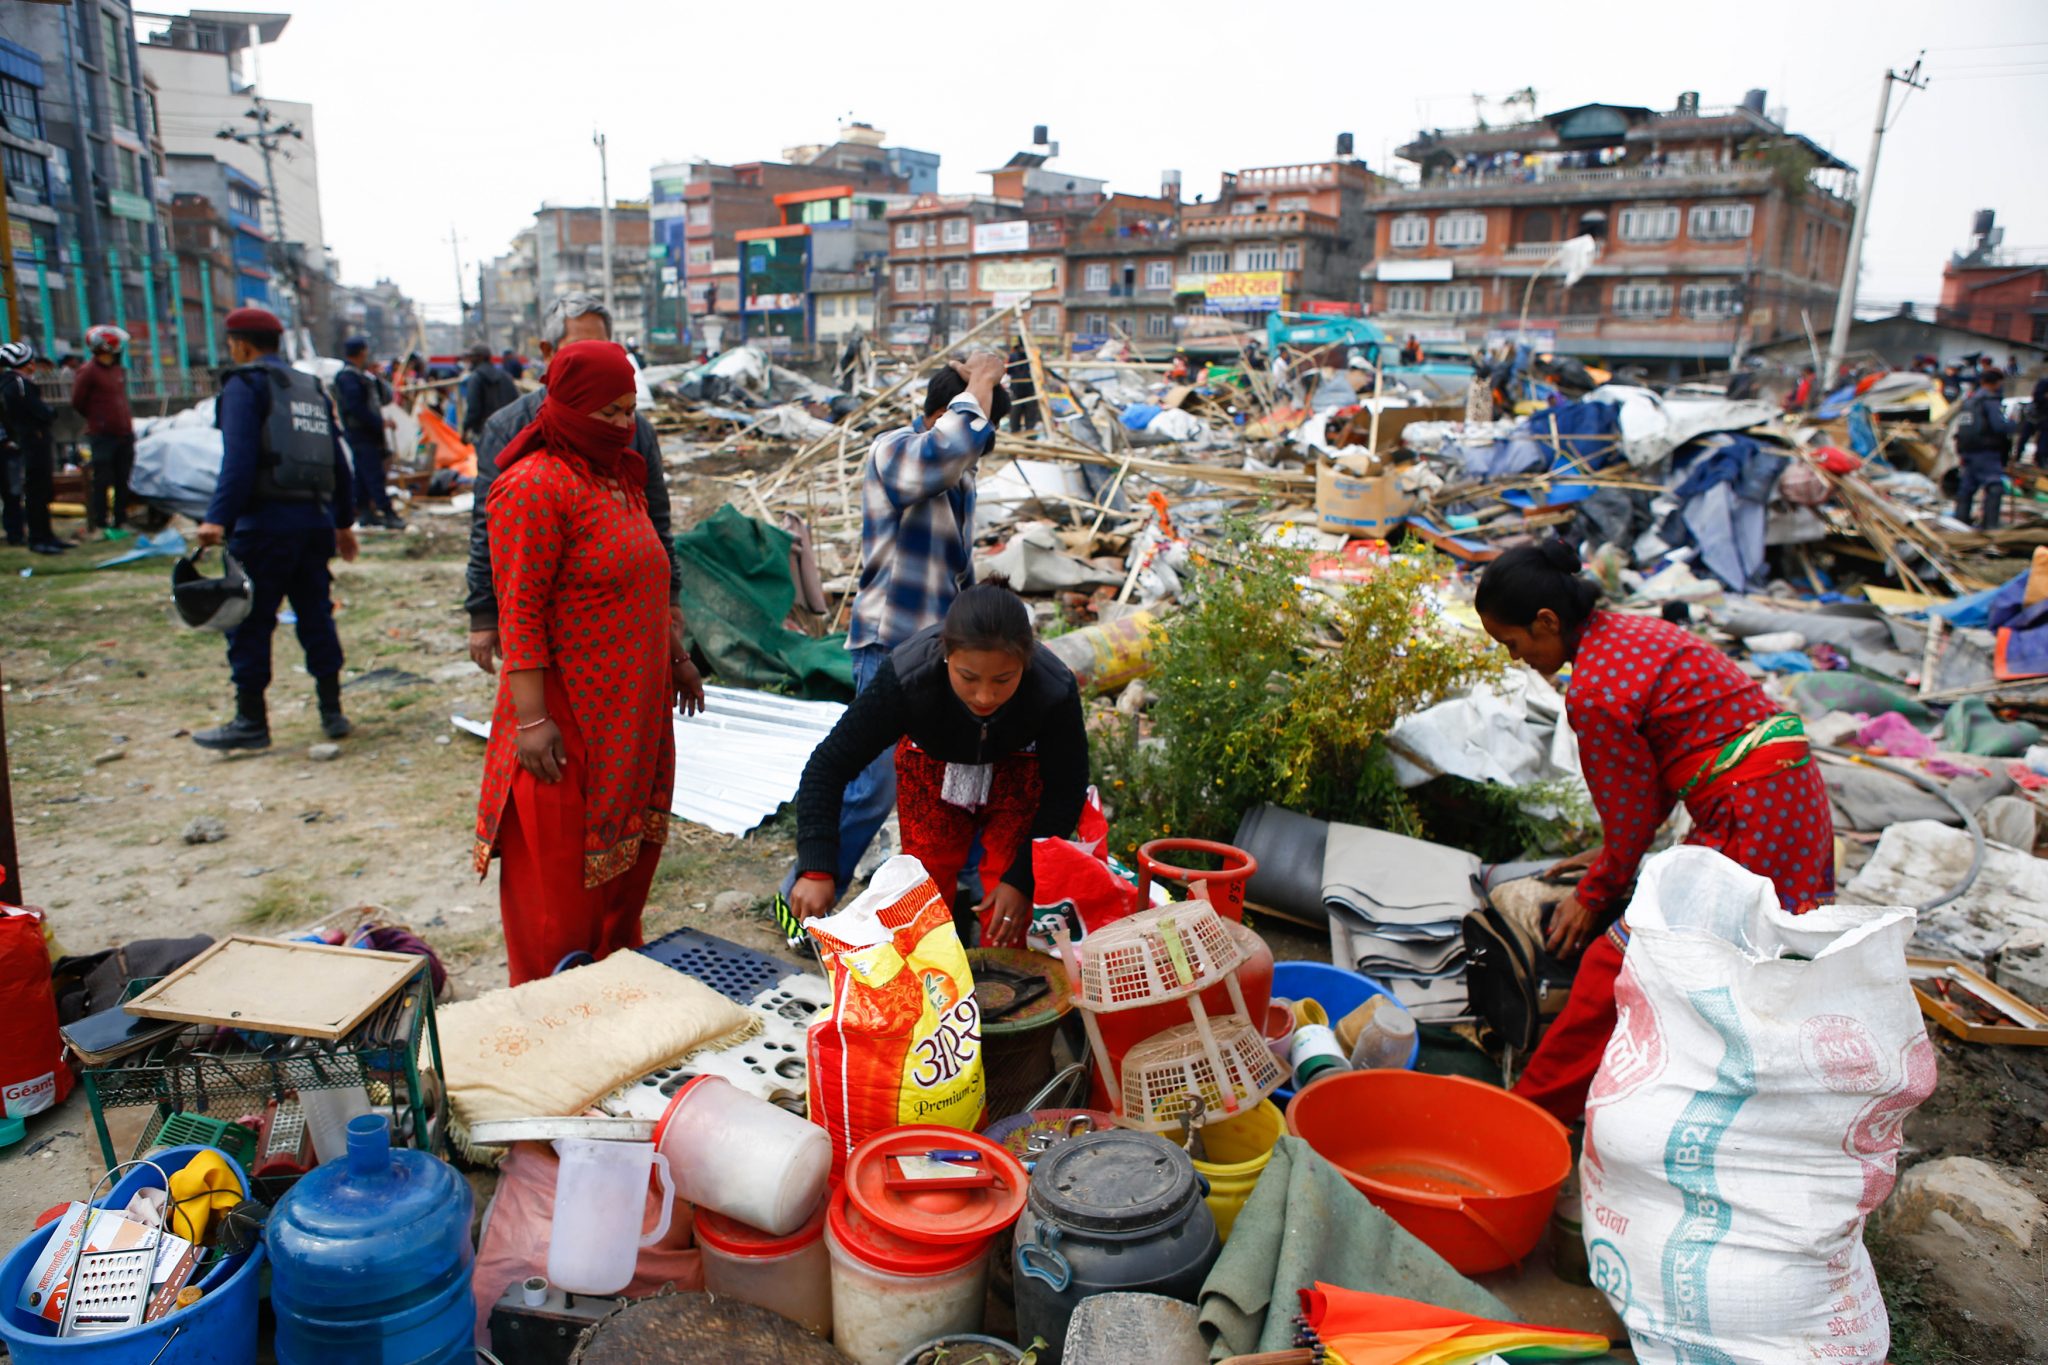 Nepalese homeless people gather their belongings at a makeshift camp for people displaced by the 2015 earthquake after it was demolished by police in Kathmandu on March 14, 2017. Nepal police on March 14 demolished the largest remaining settlement of people displaced by a powerful earthquake that struck nearly two years ago, a move that will leave hundreds homeless. Around 100 families were still living in the camp in Kathmandu when police wearing riot gear used bulldozers to flatten the bamboo and tarpaulin structures. / AFP PHOTO / Sulav SHRESTHA